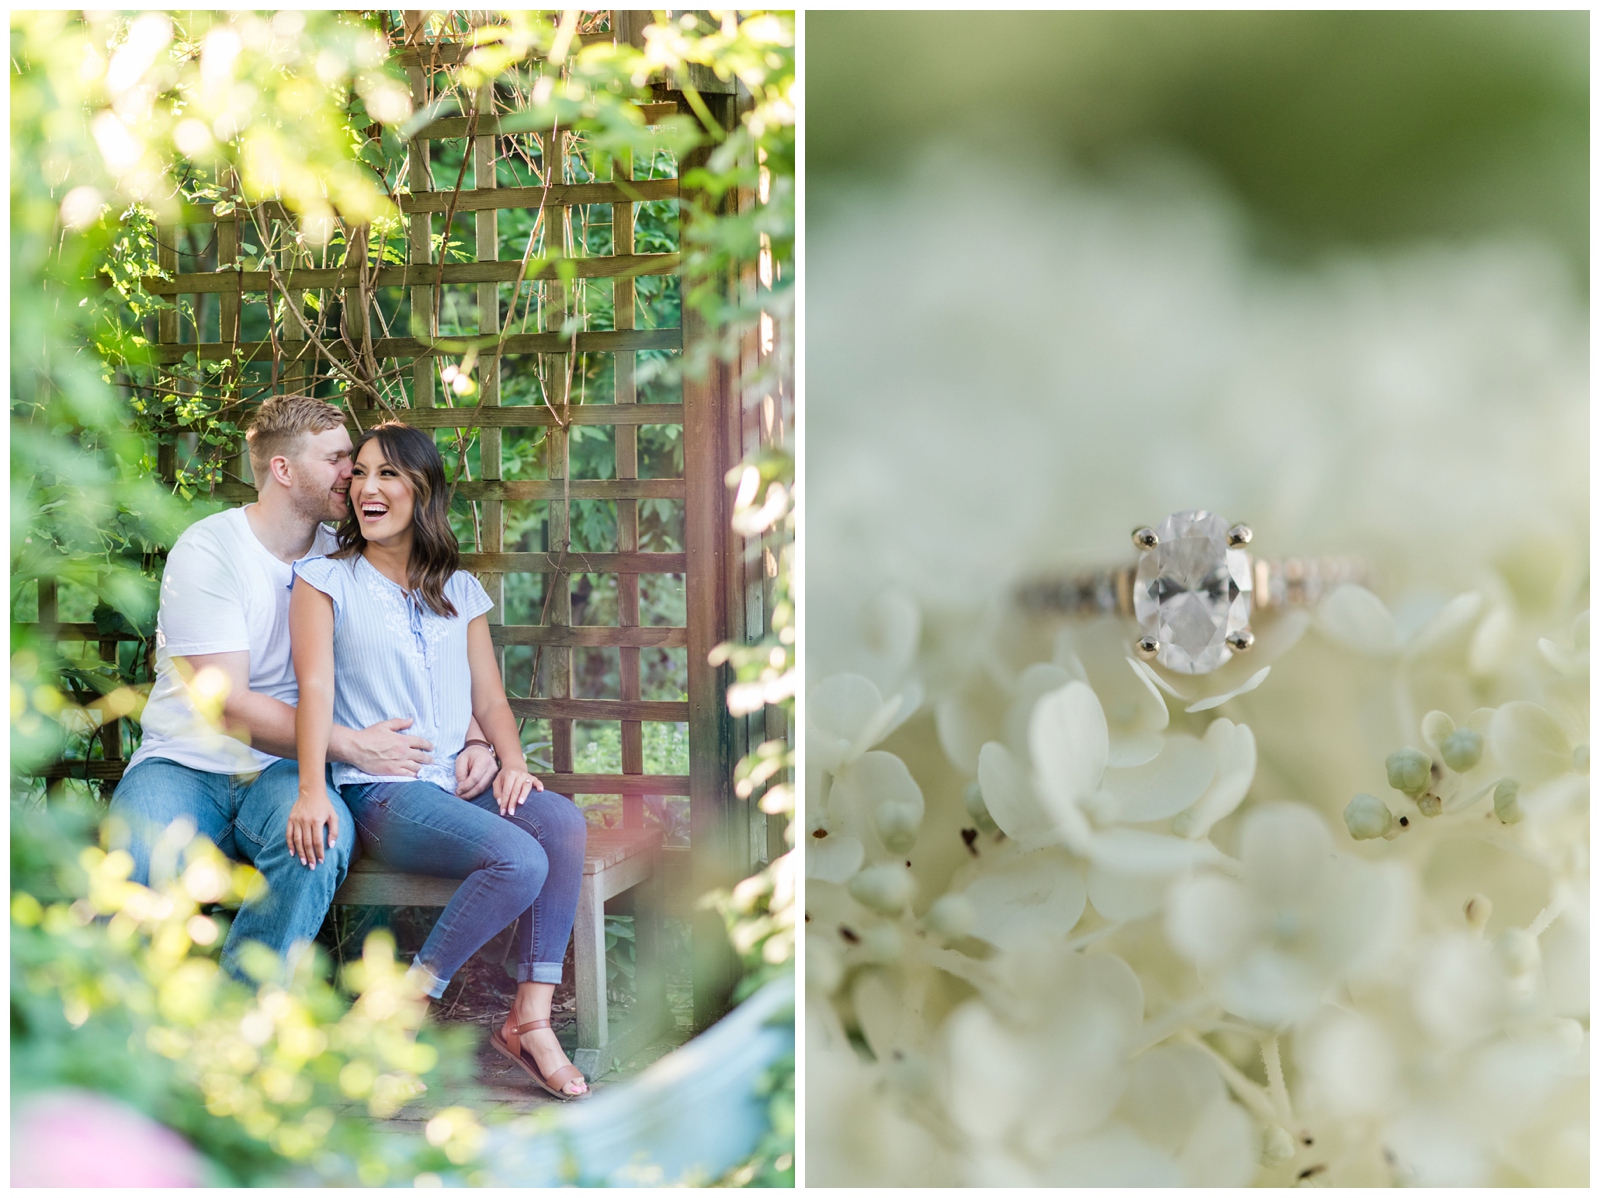 two images the left image is an engaged couple happily looking away from the camera and enjoying each others company sitting on a bench. the right image is a picture of a oval diamond engagement ring sitting on a white hydrangea flower 